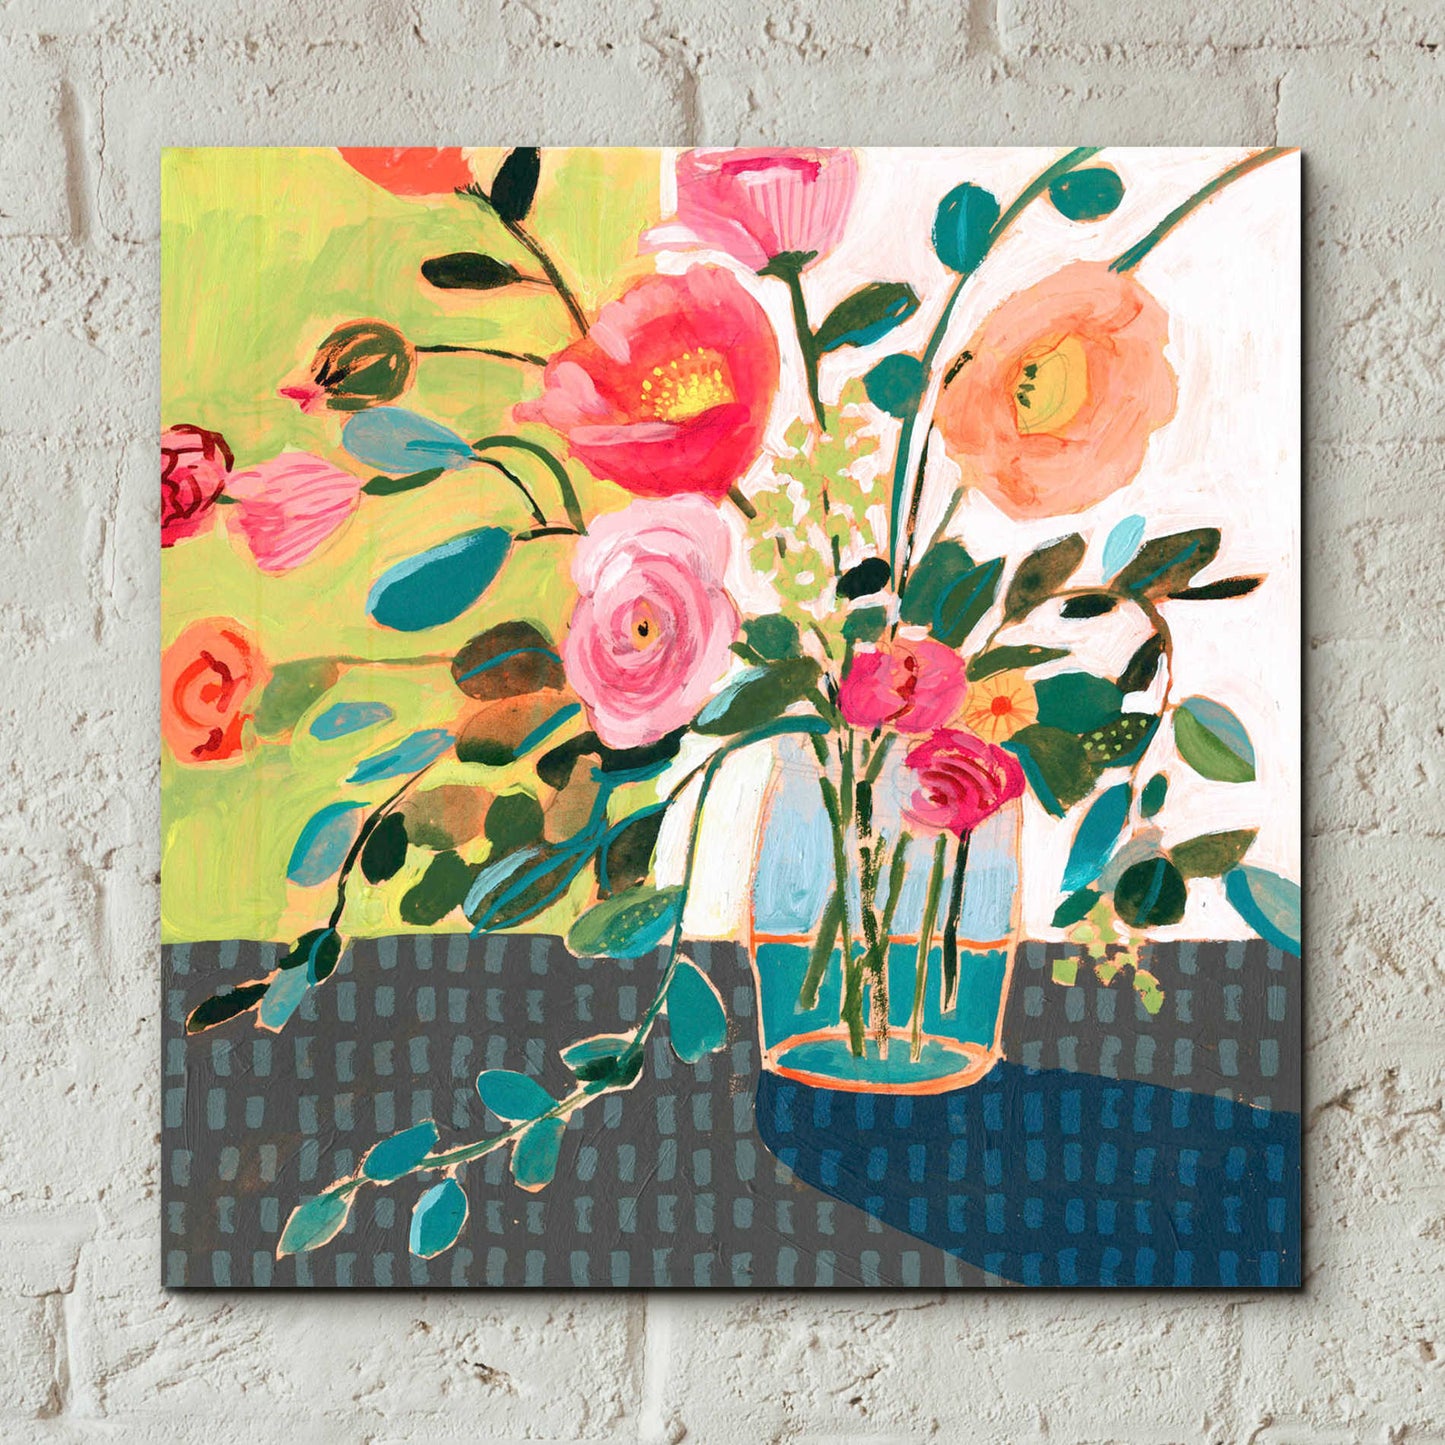 Epic Art 'Quirky Bouquet II' by Victoria Borges, Acrylic Wall Art,12x12